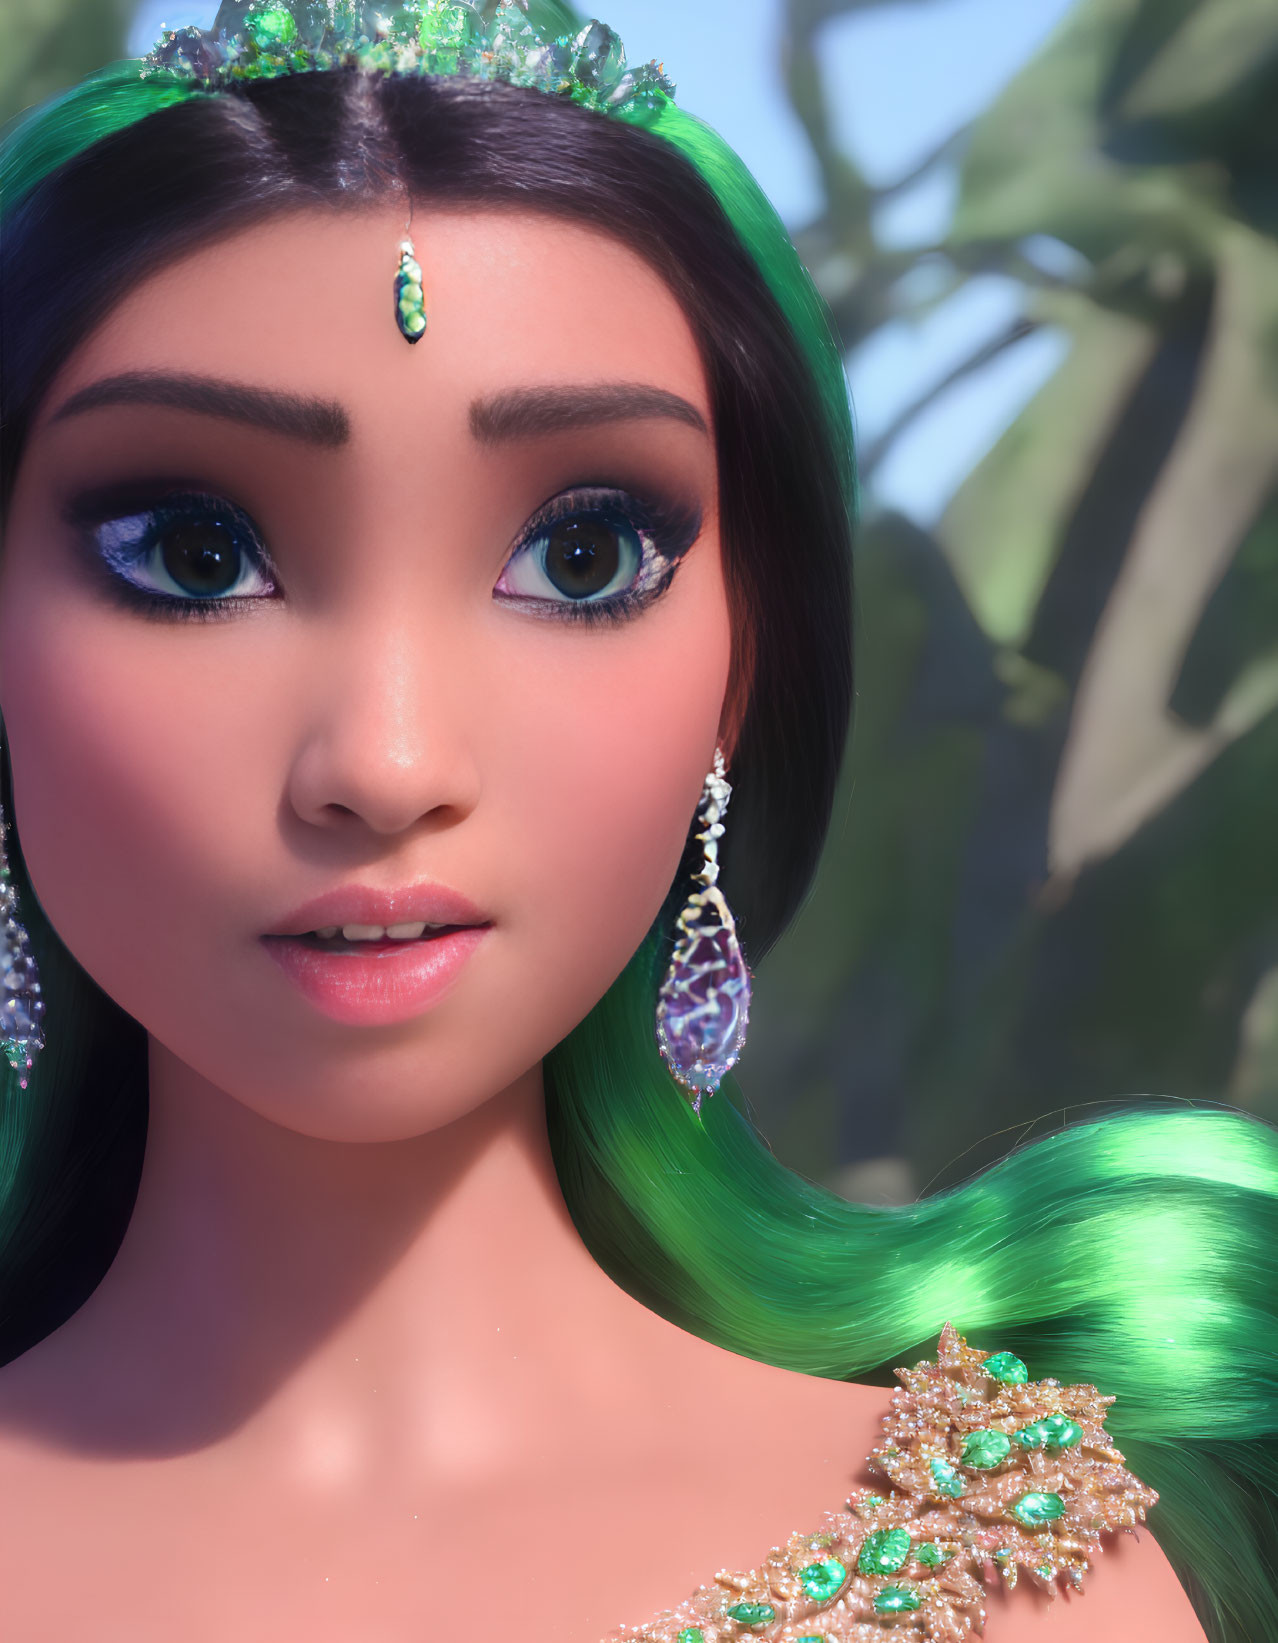 3D-rendered female figure with blue eyes, gemstone jewelry, and green hair